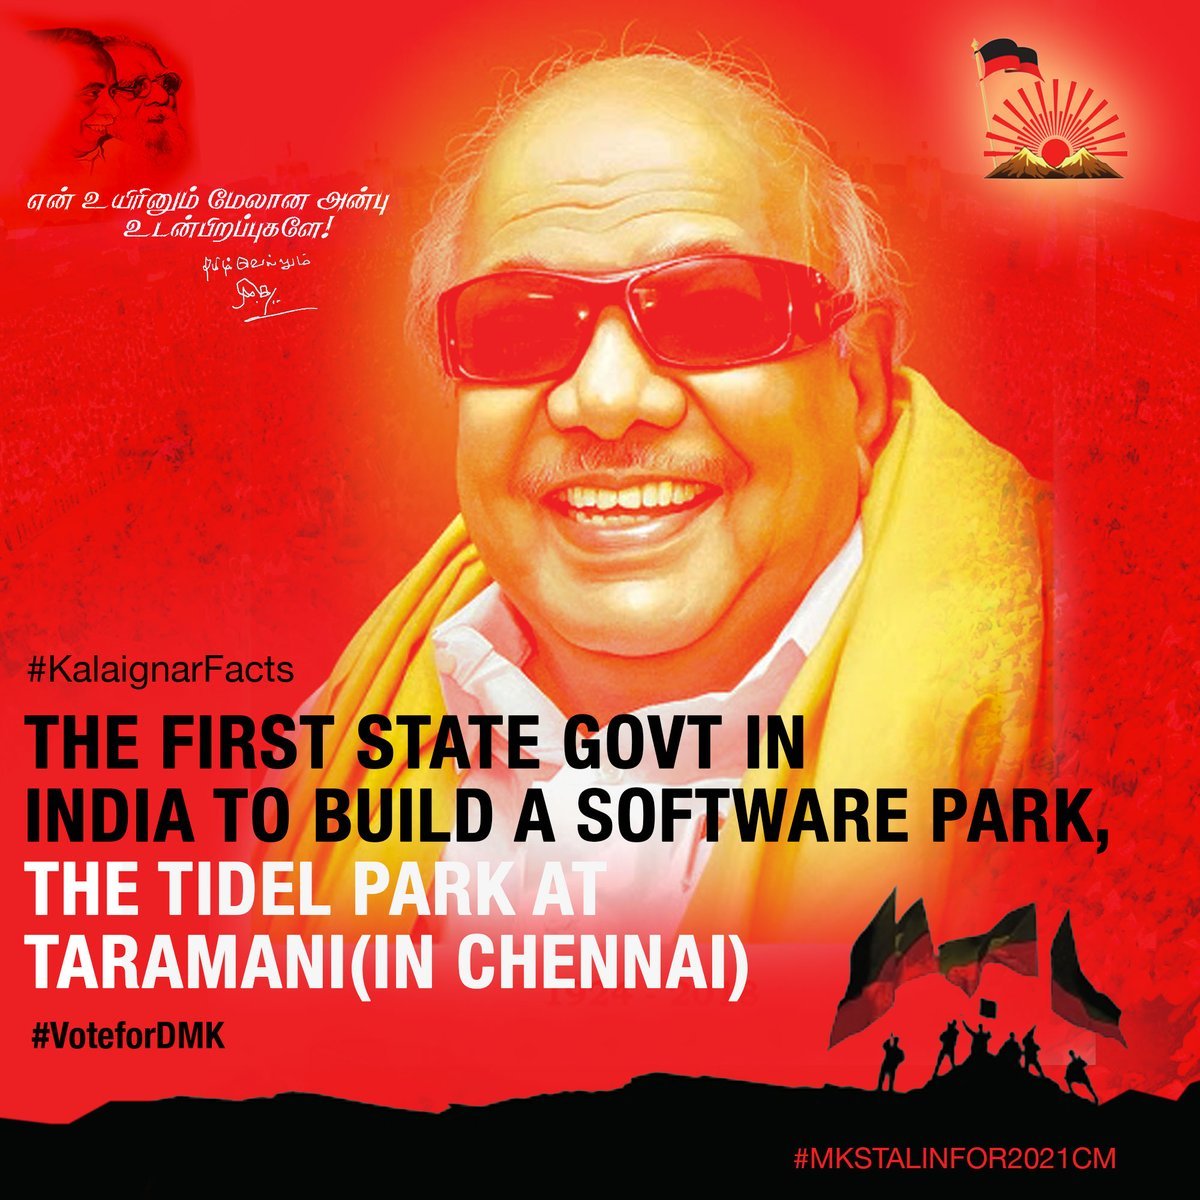  #DMKFacts  #MKStainfor2021CM The first State govt in India to build a software park, the TIDEL Park at Taramani(in Chennai)